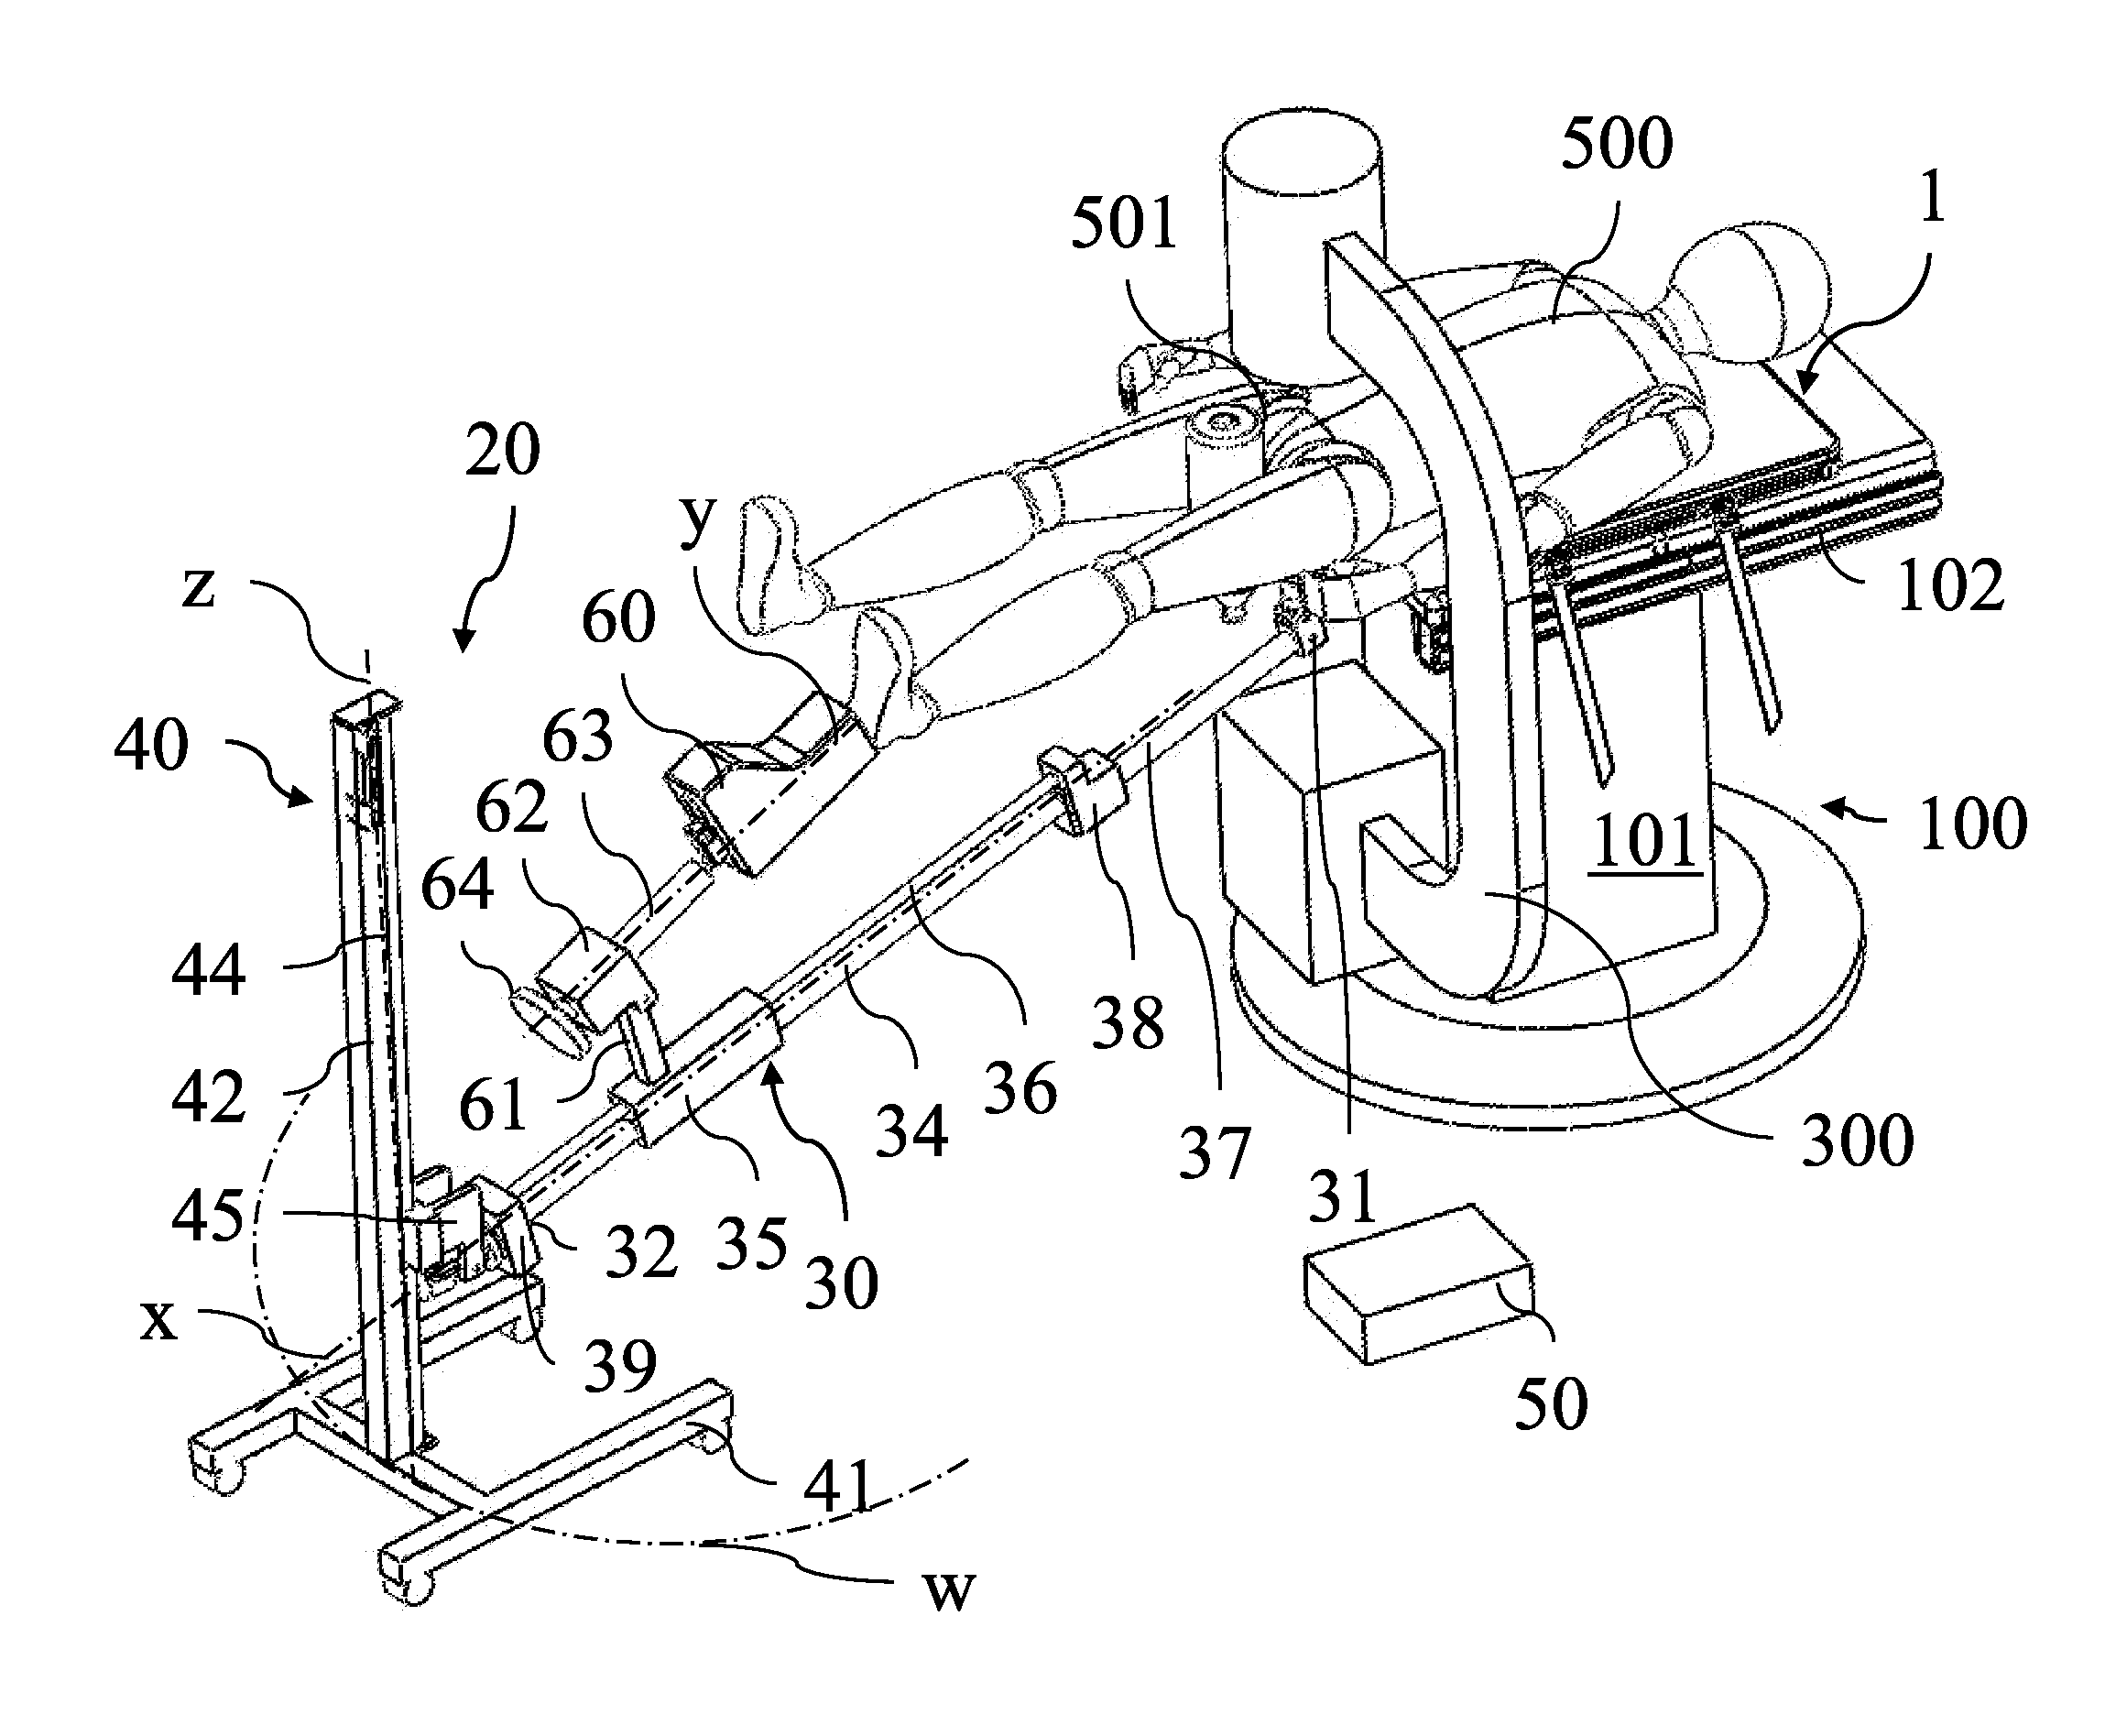 Apparatus for positioning the lower limb of a patient during operation, in particular for hip replacement operations with anterior approach, and surgical positioning system comprising said apparatus